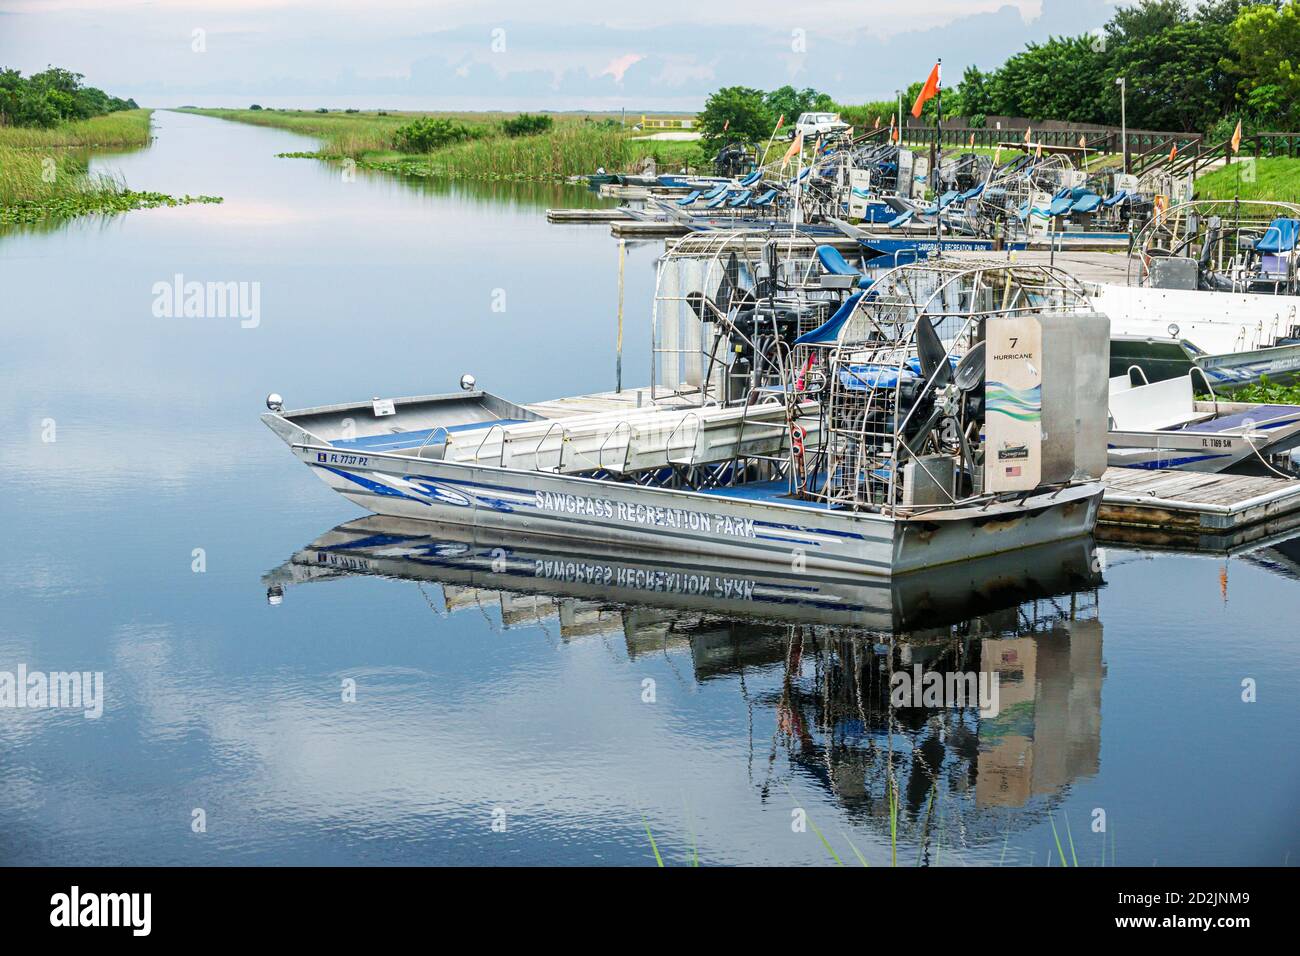 Weston Florida,Fort Ft. Lauderdale,Sawgrass Recreation Park,Everglades canal,airboats parked docked unused,tourism industry shut down,Covid-19 coronav Stock Photo